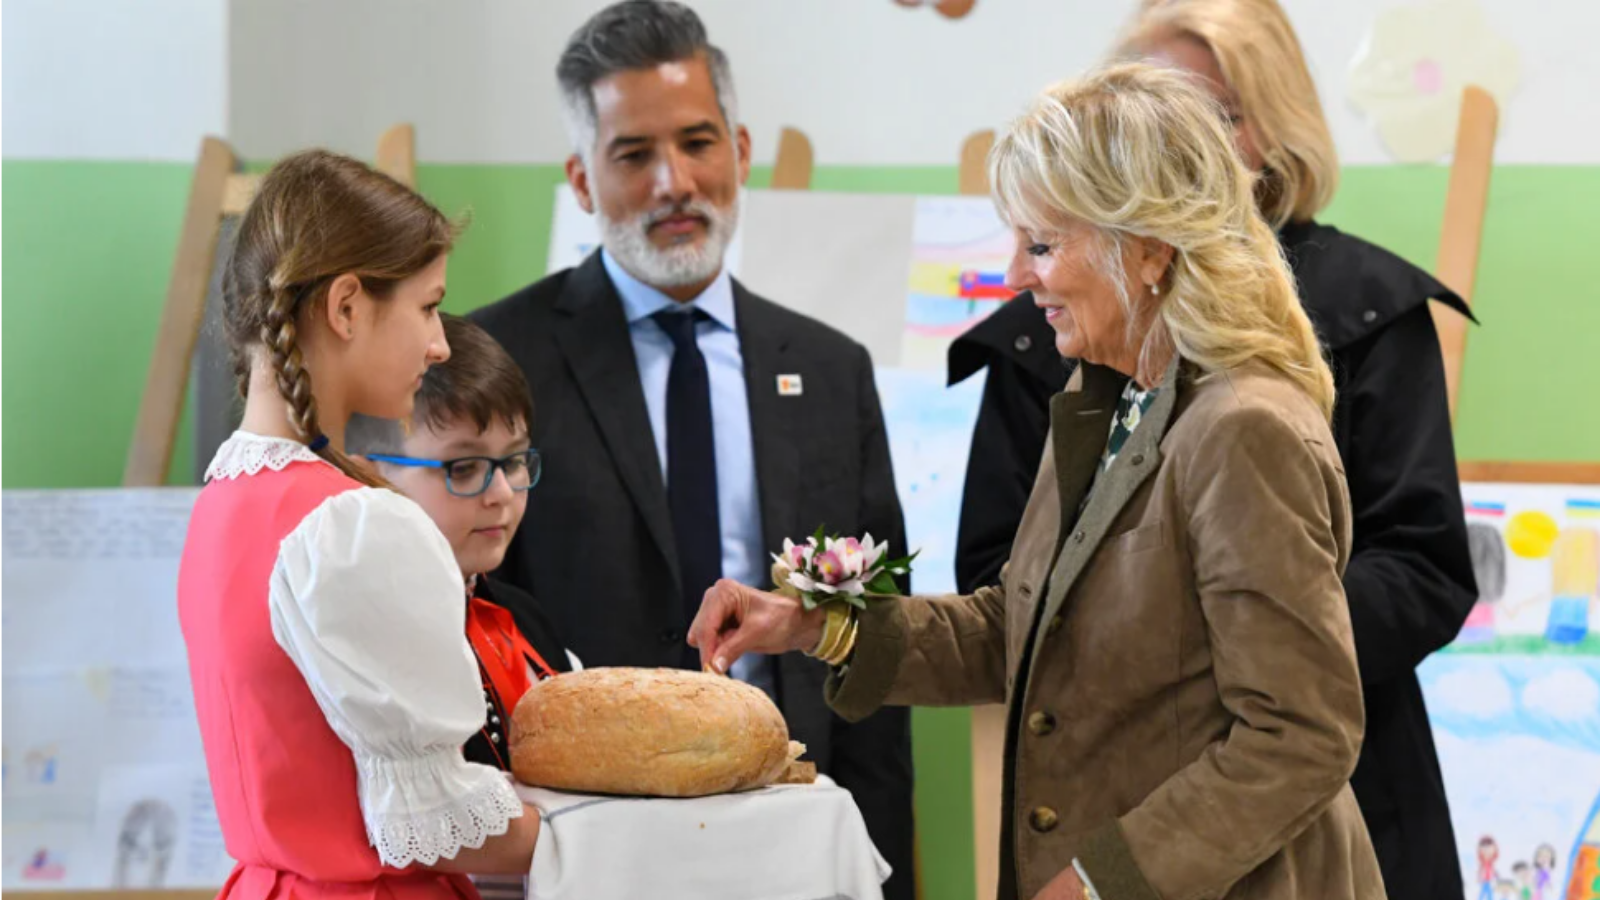 First Lady of the United States Dr. Jill Biden visits a Slovak school hosting Ukrainian students on Mother's Day. May 8, 2022. (U.S. Mission Slovakia photo)